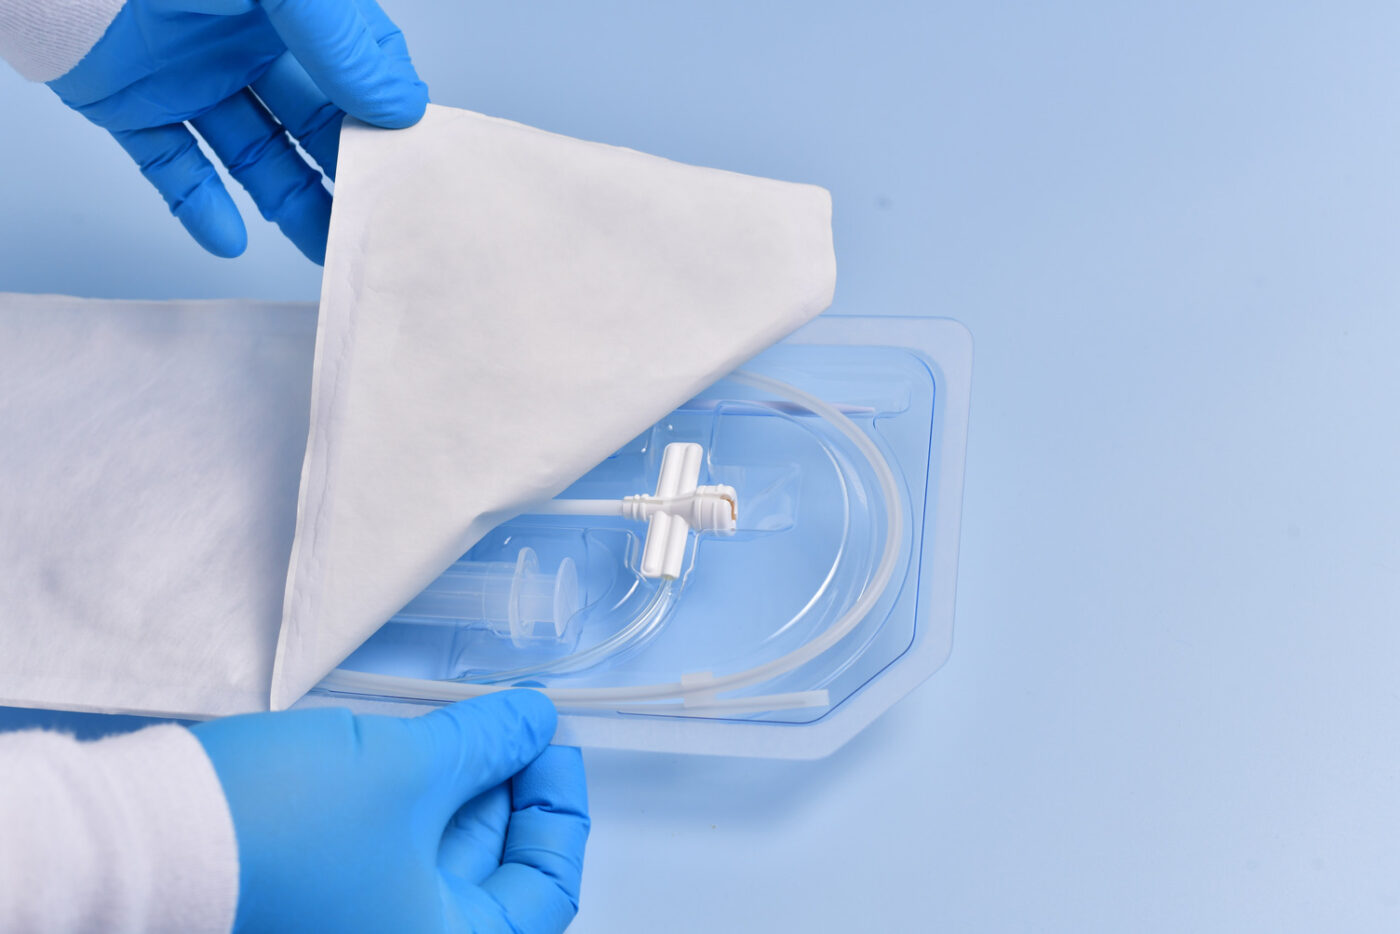 Sterile Medical Device Packaging